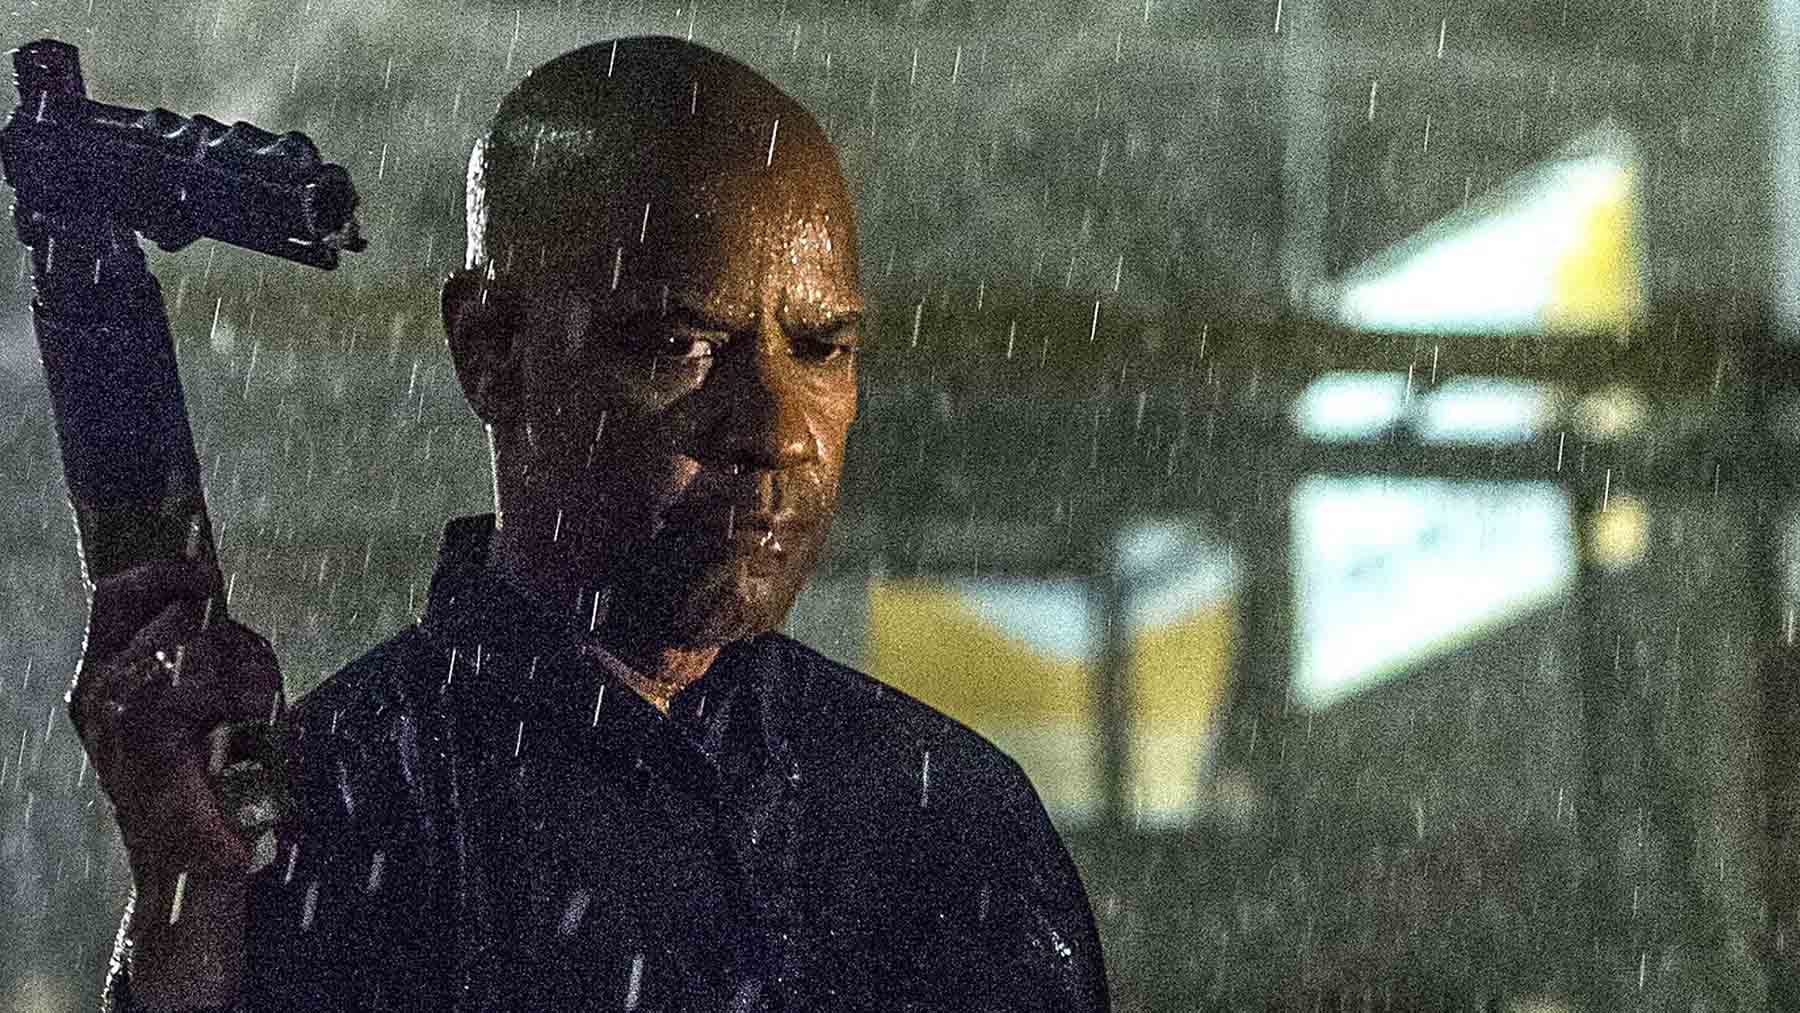 ‘The equalizer’ (Columbia Pictures)